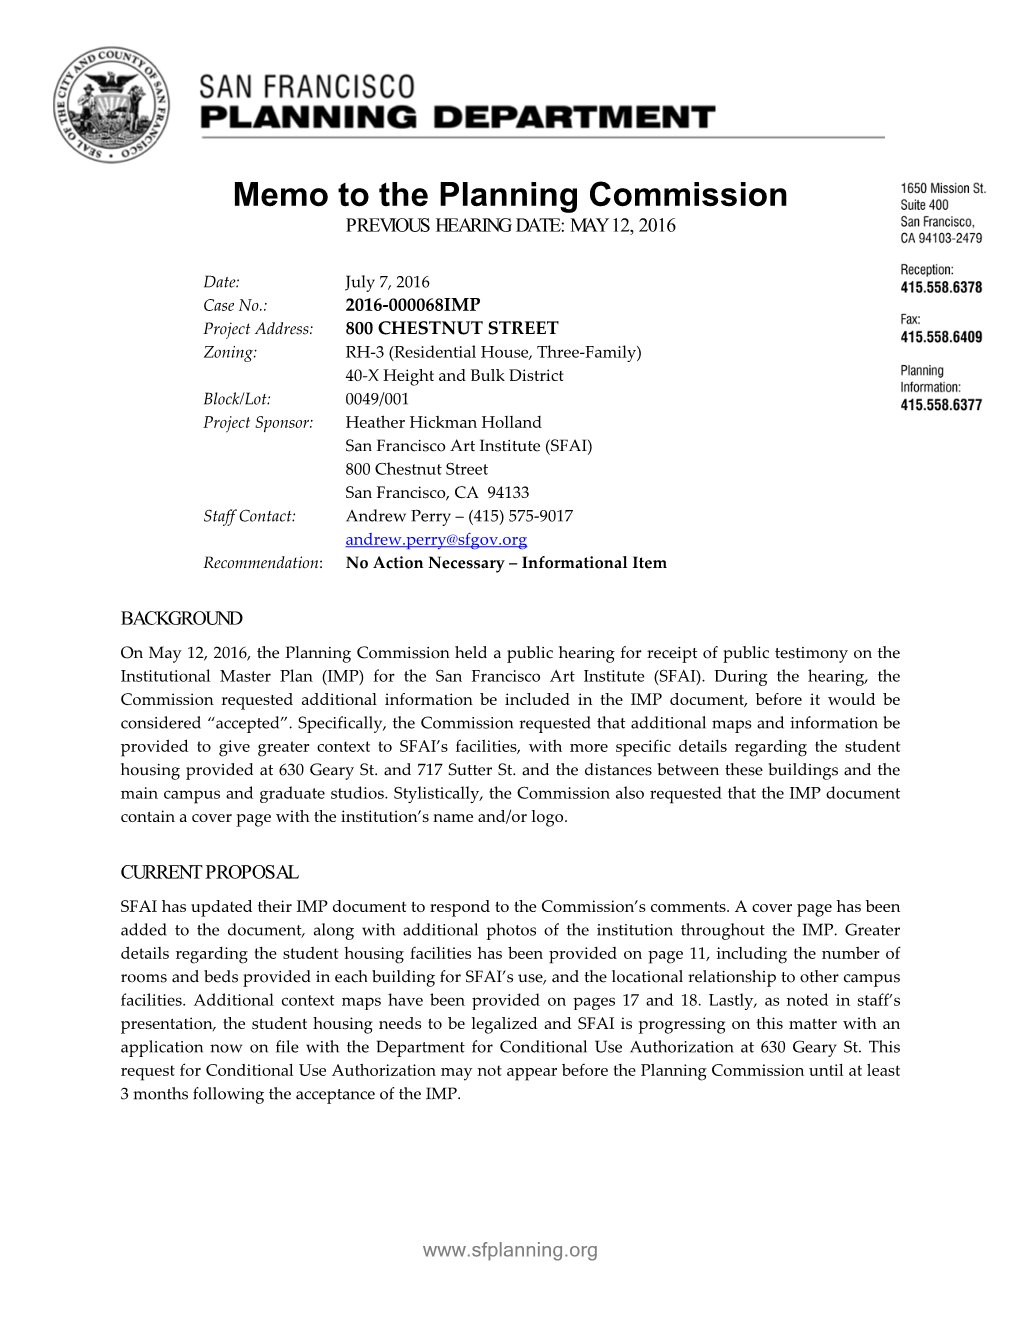 Memo to the Planning Commission PREVIOUS HEARING DATE: MAY 12, 2016